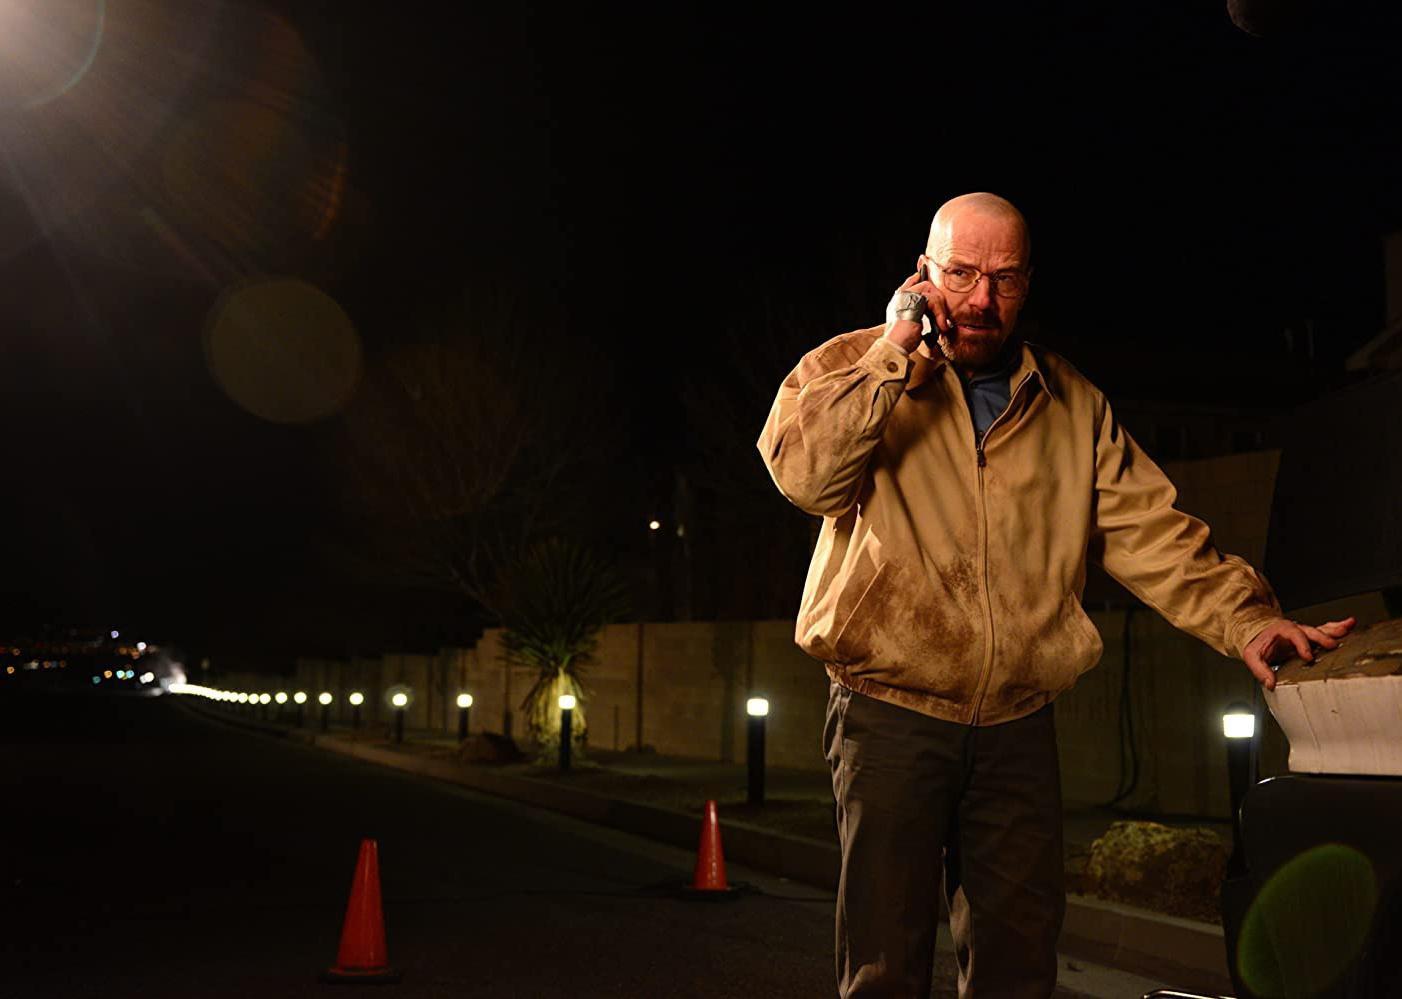 Bryan Cranston in a dirty jacket outside at night.